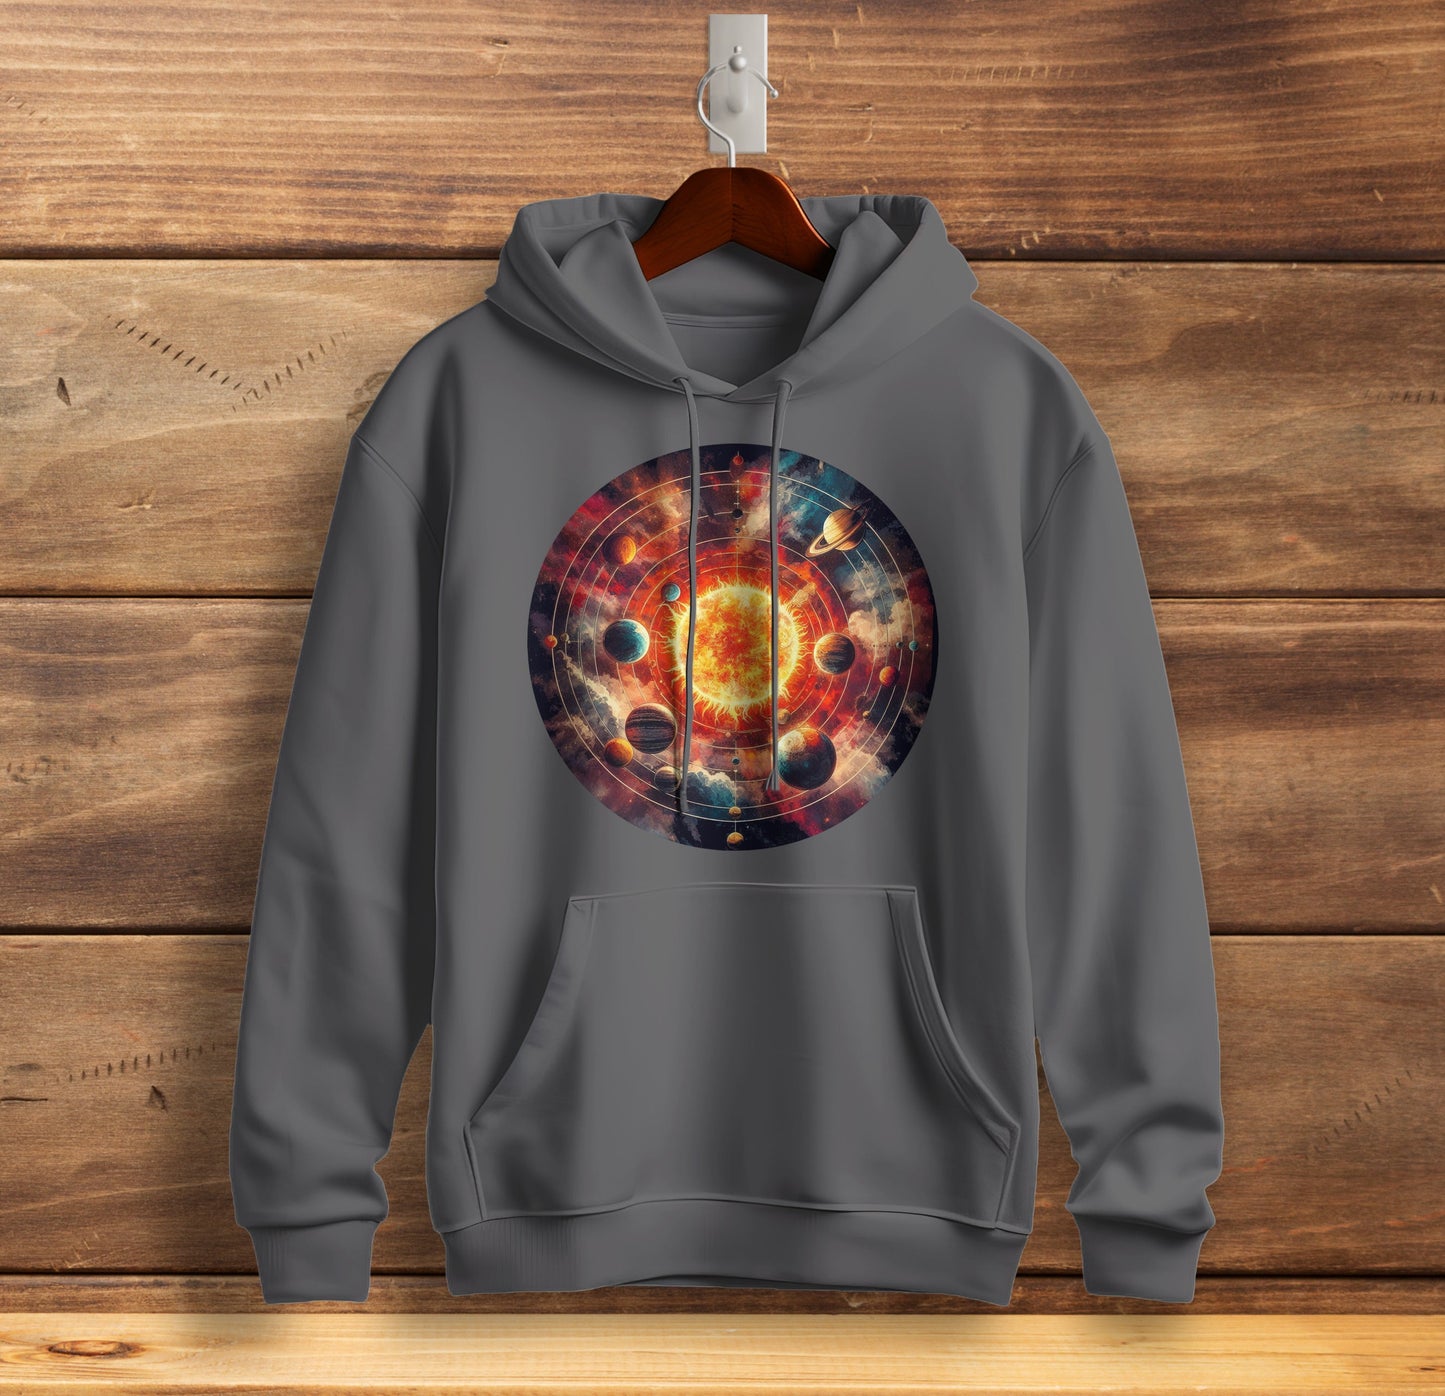 The Solar System - Graphic Printed Hooded Sweat Shirt for Men - Cotton - Cosmos Sweat Shirt 🪐 ☀️ ☯️ 🌘🌑🌒